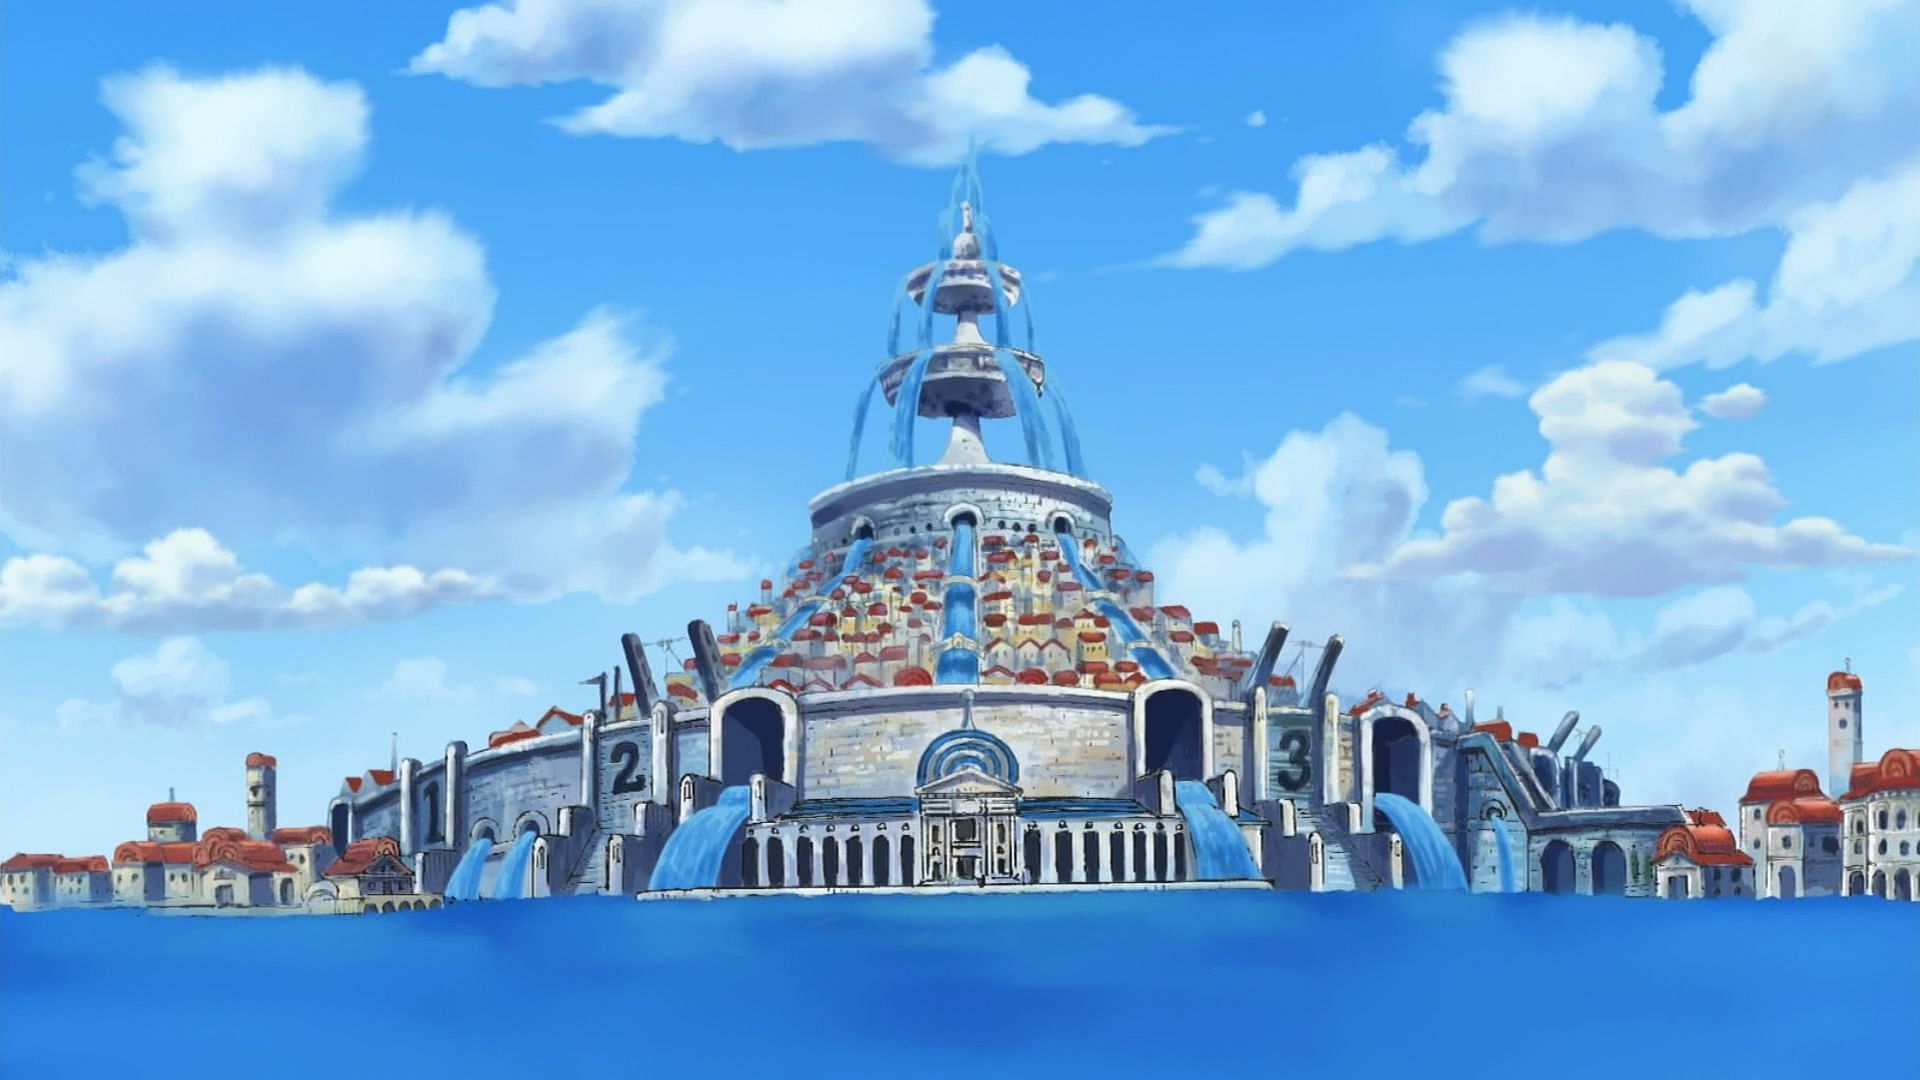 Water 7 as seen in the anime (Image via Toei Animation)